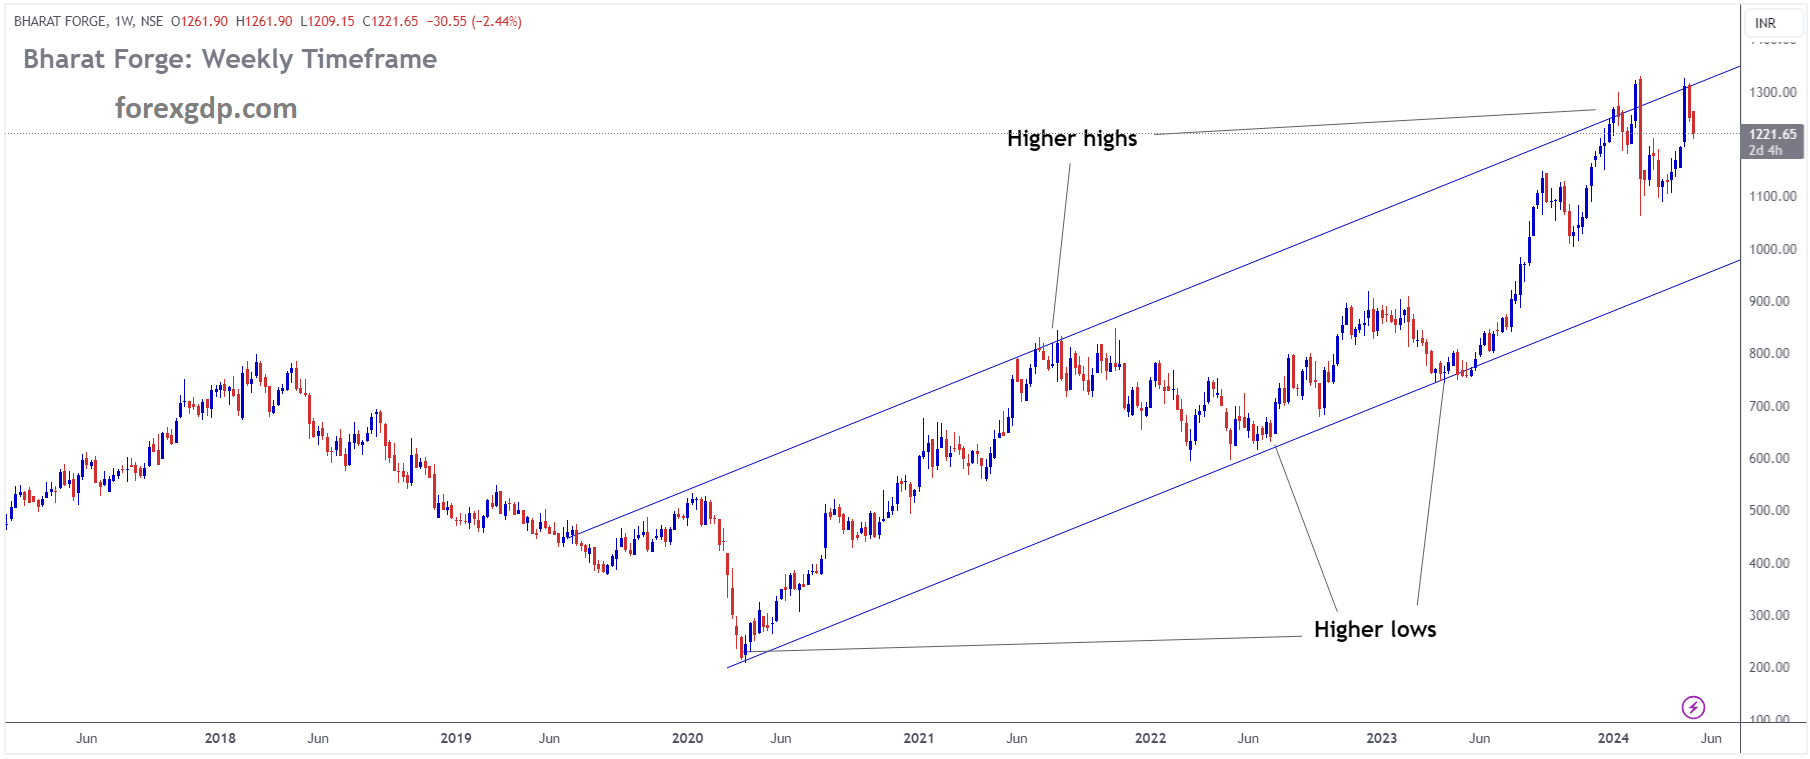 BHARAT FORGE Market price is moving in Ascending channel and market has fallen from the higher high area of the channel